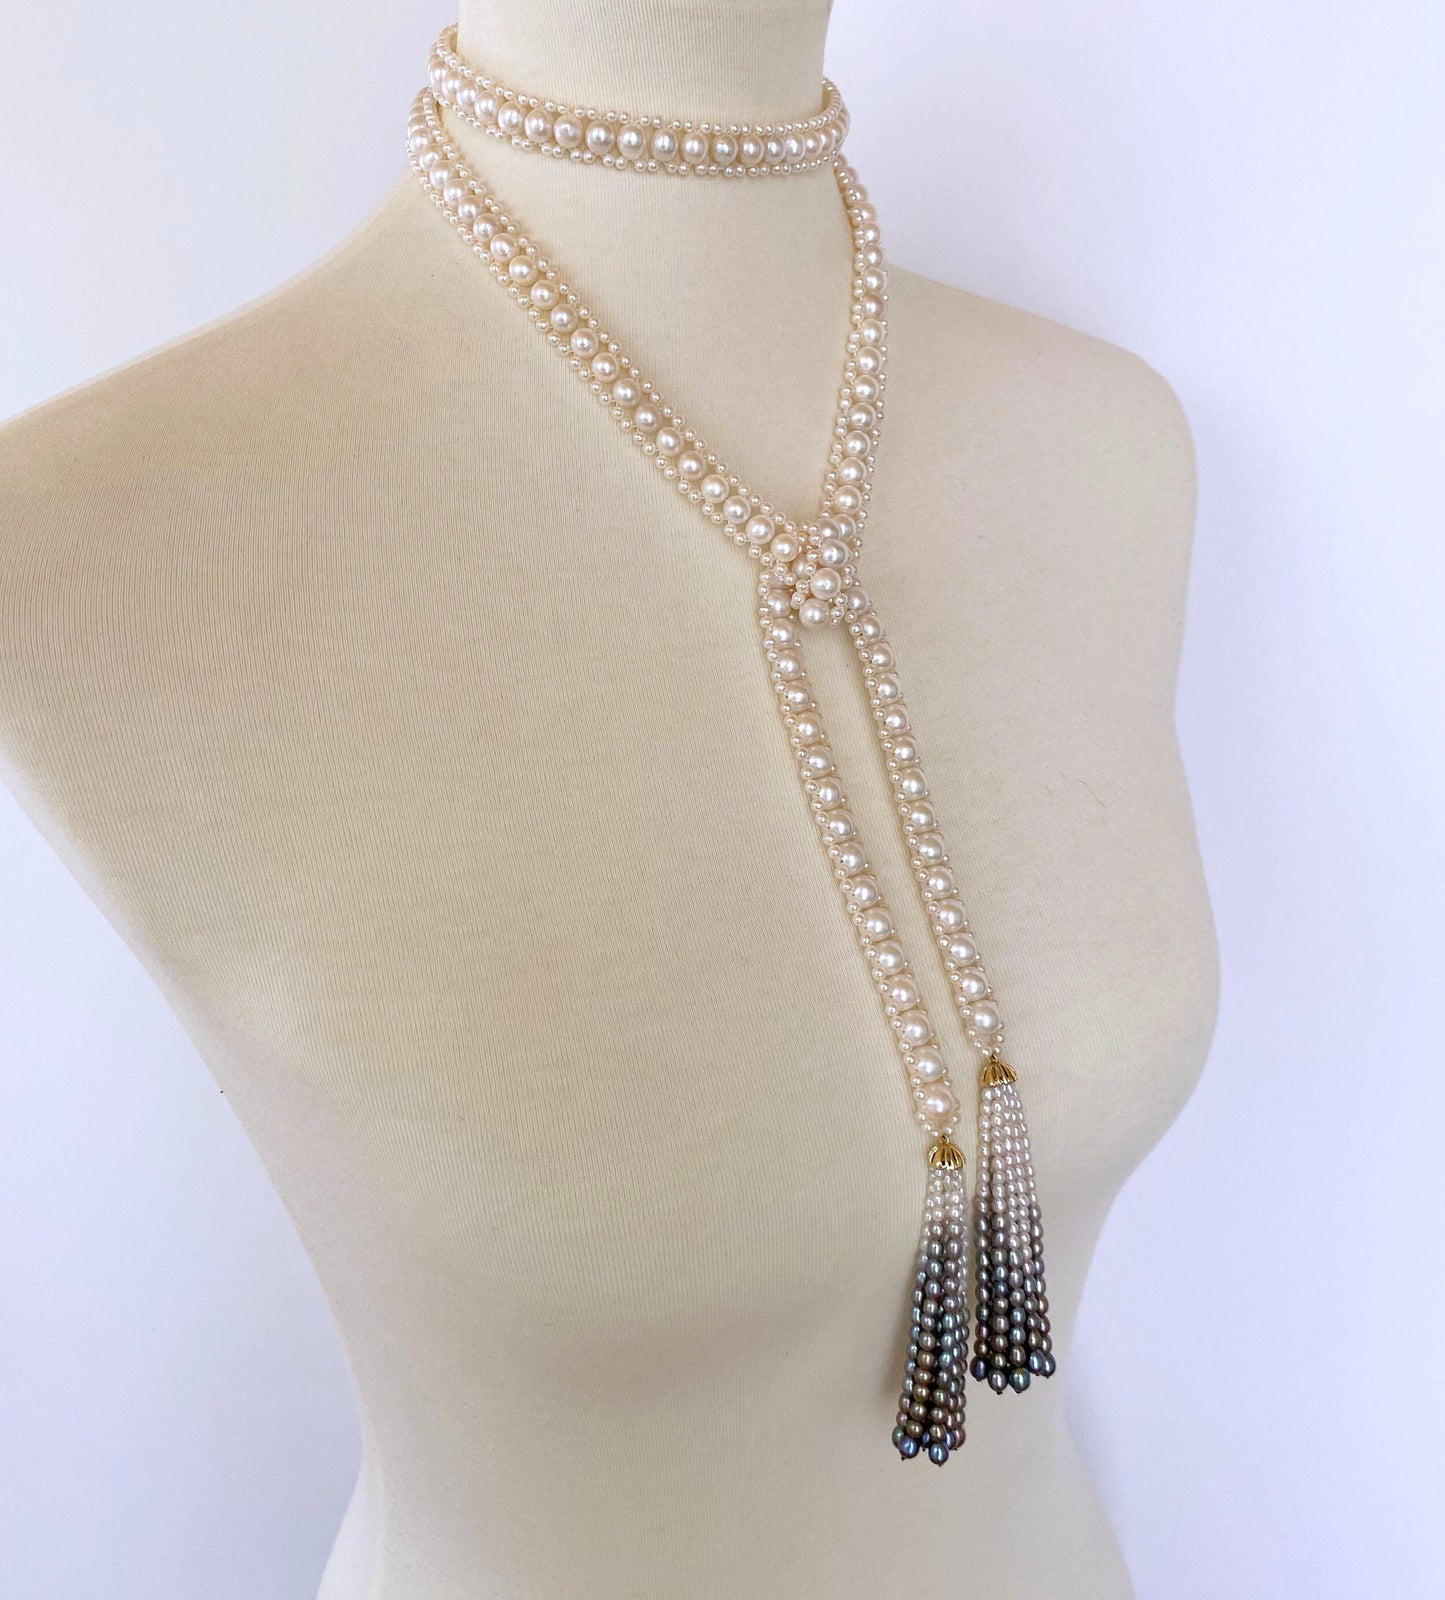 Woven Pearl Sautoir with Graduated Ombre Tassels and 14K Yellow Gold